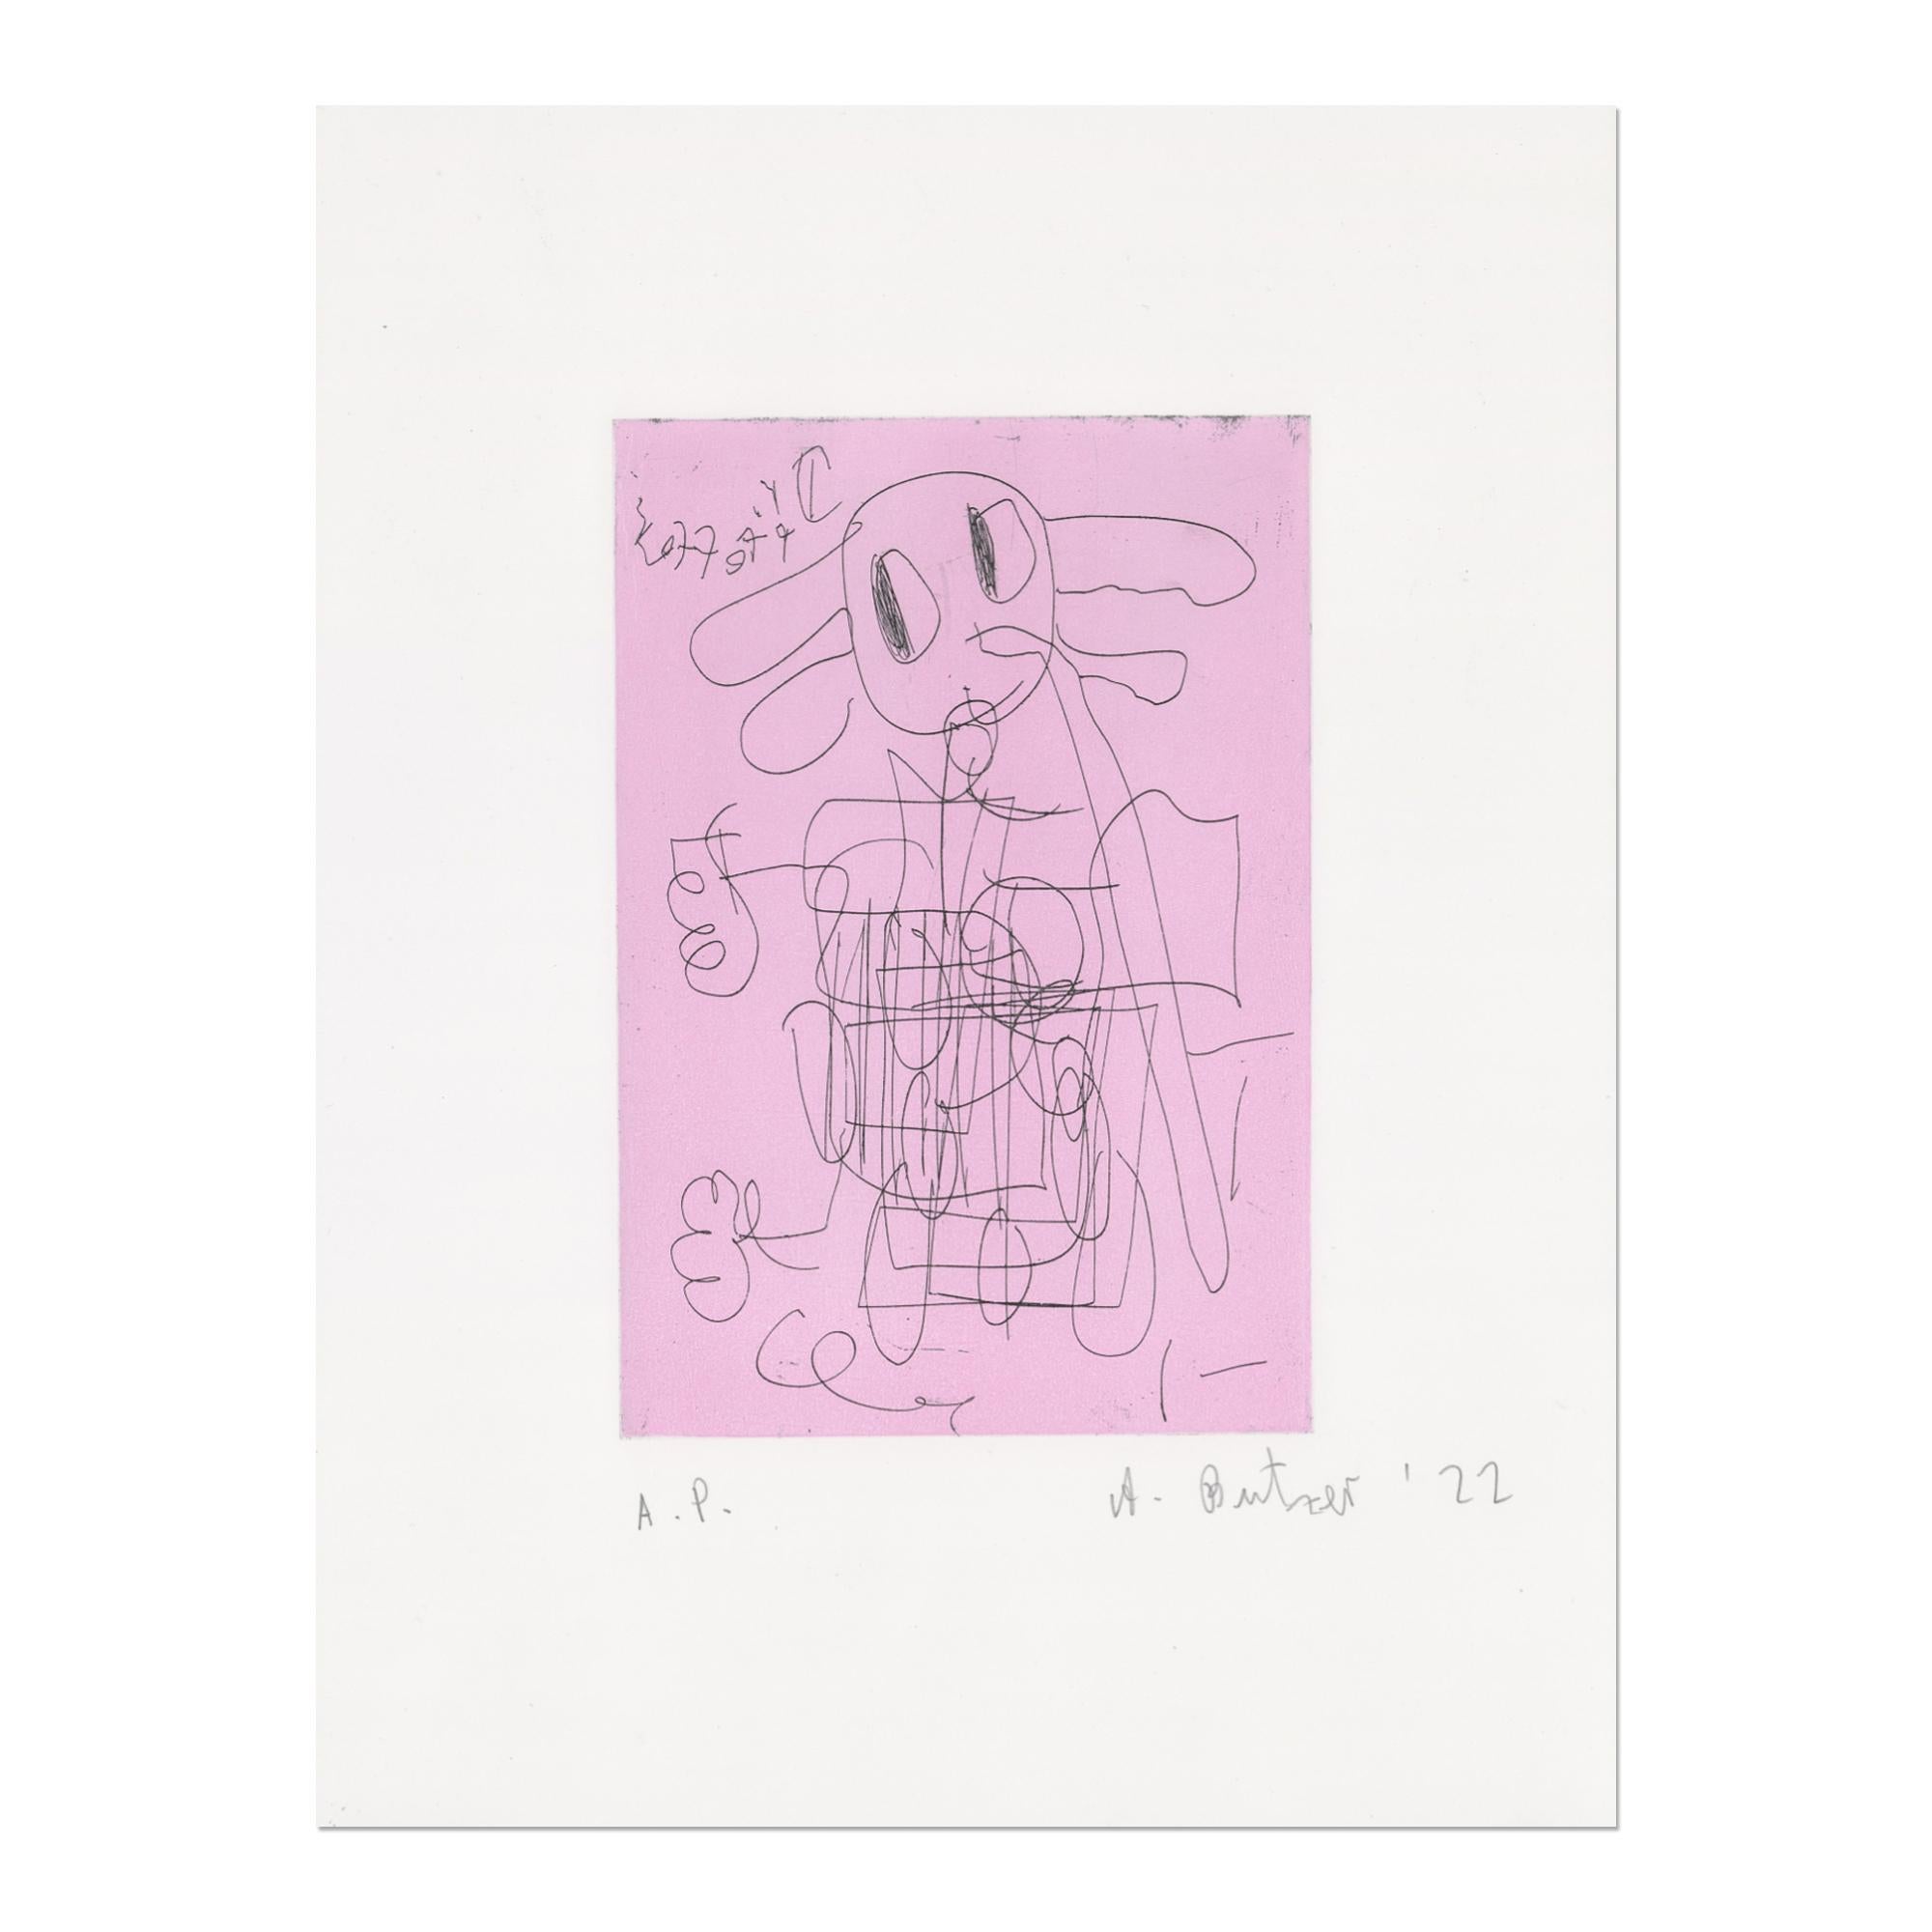 André Butzer (German, b. 1973)
Untitled (Dr. Pfeffer), 2019/2022
Medium: Etching in colors on wove paper
Dimensions: 43 x 33 cm
Edition of 15: Hand-signed, numbered and dated in pencil
Condition: Mint